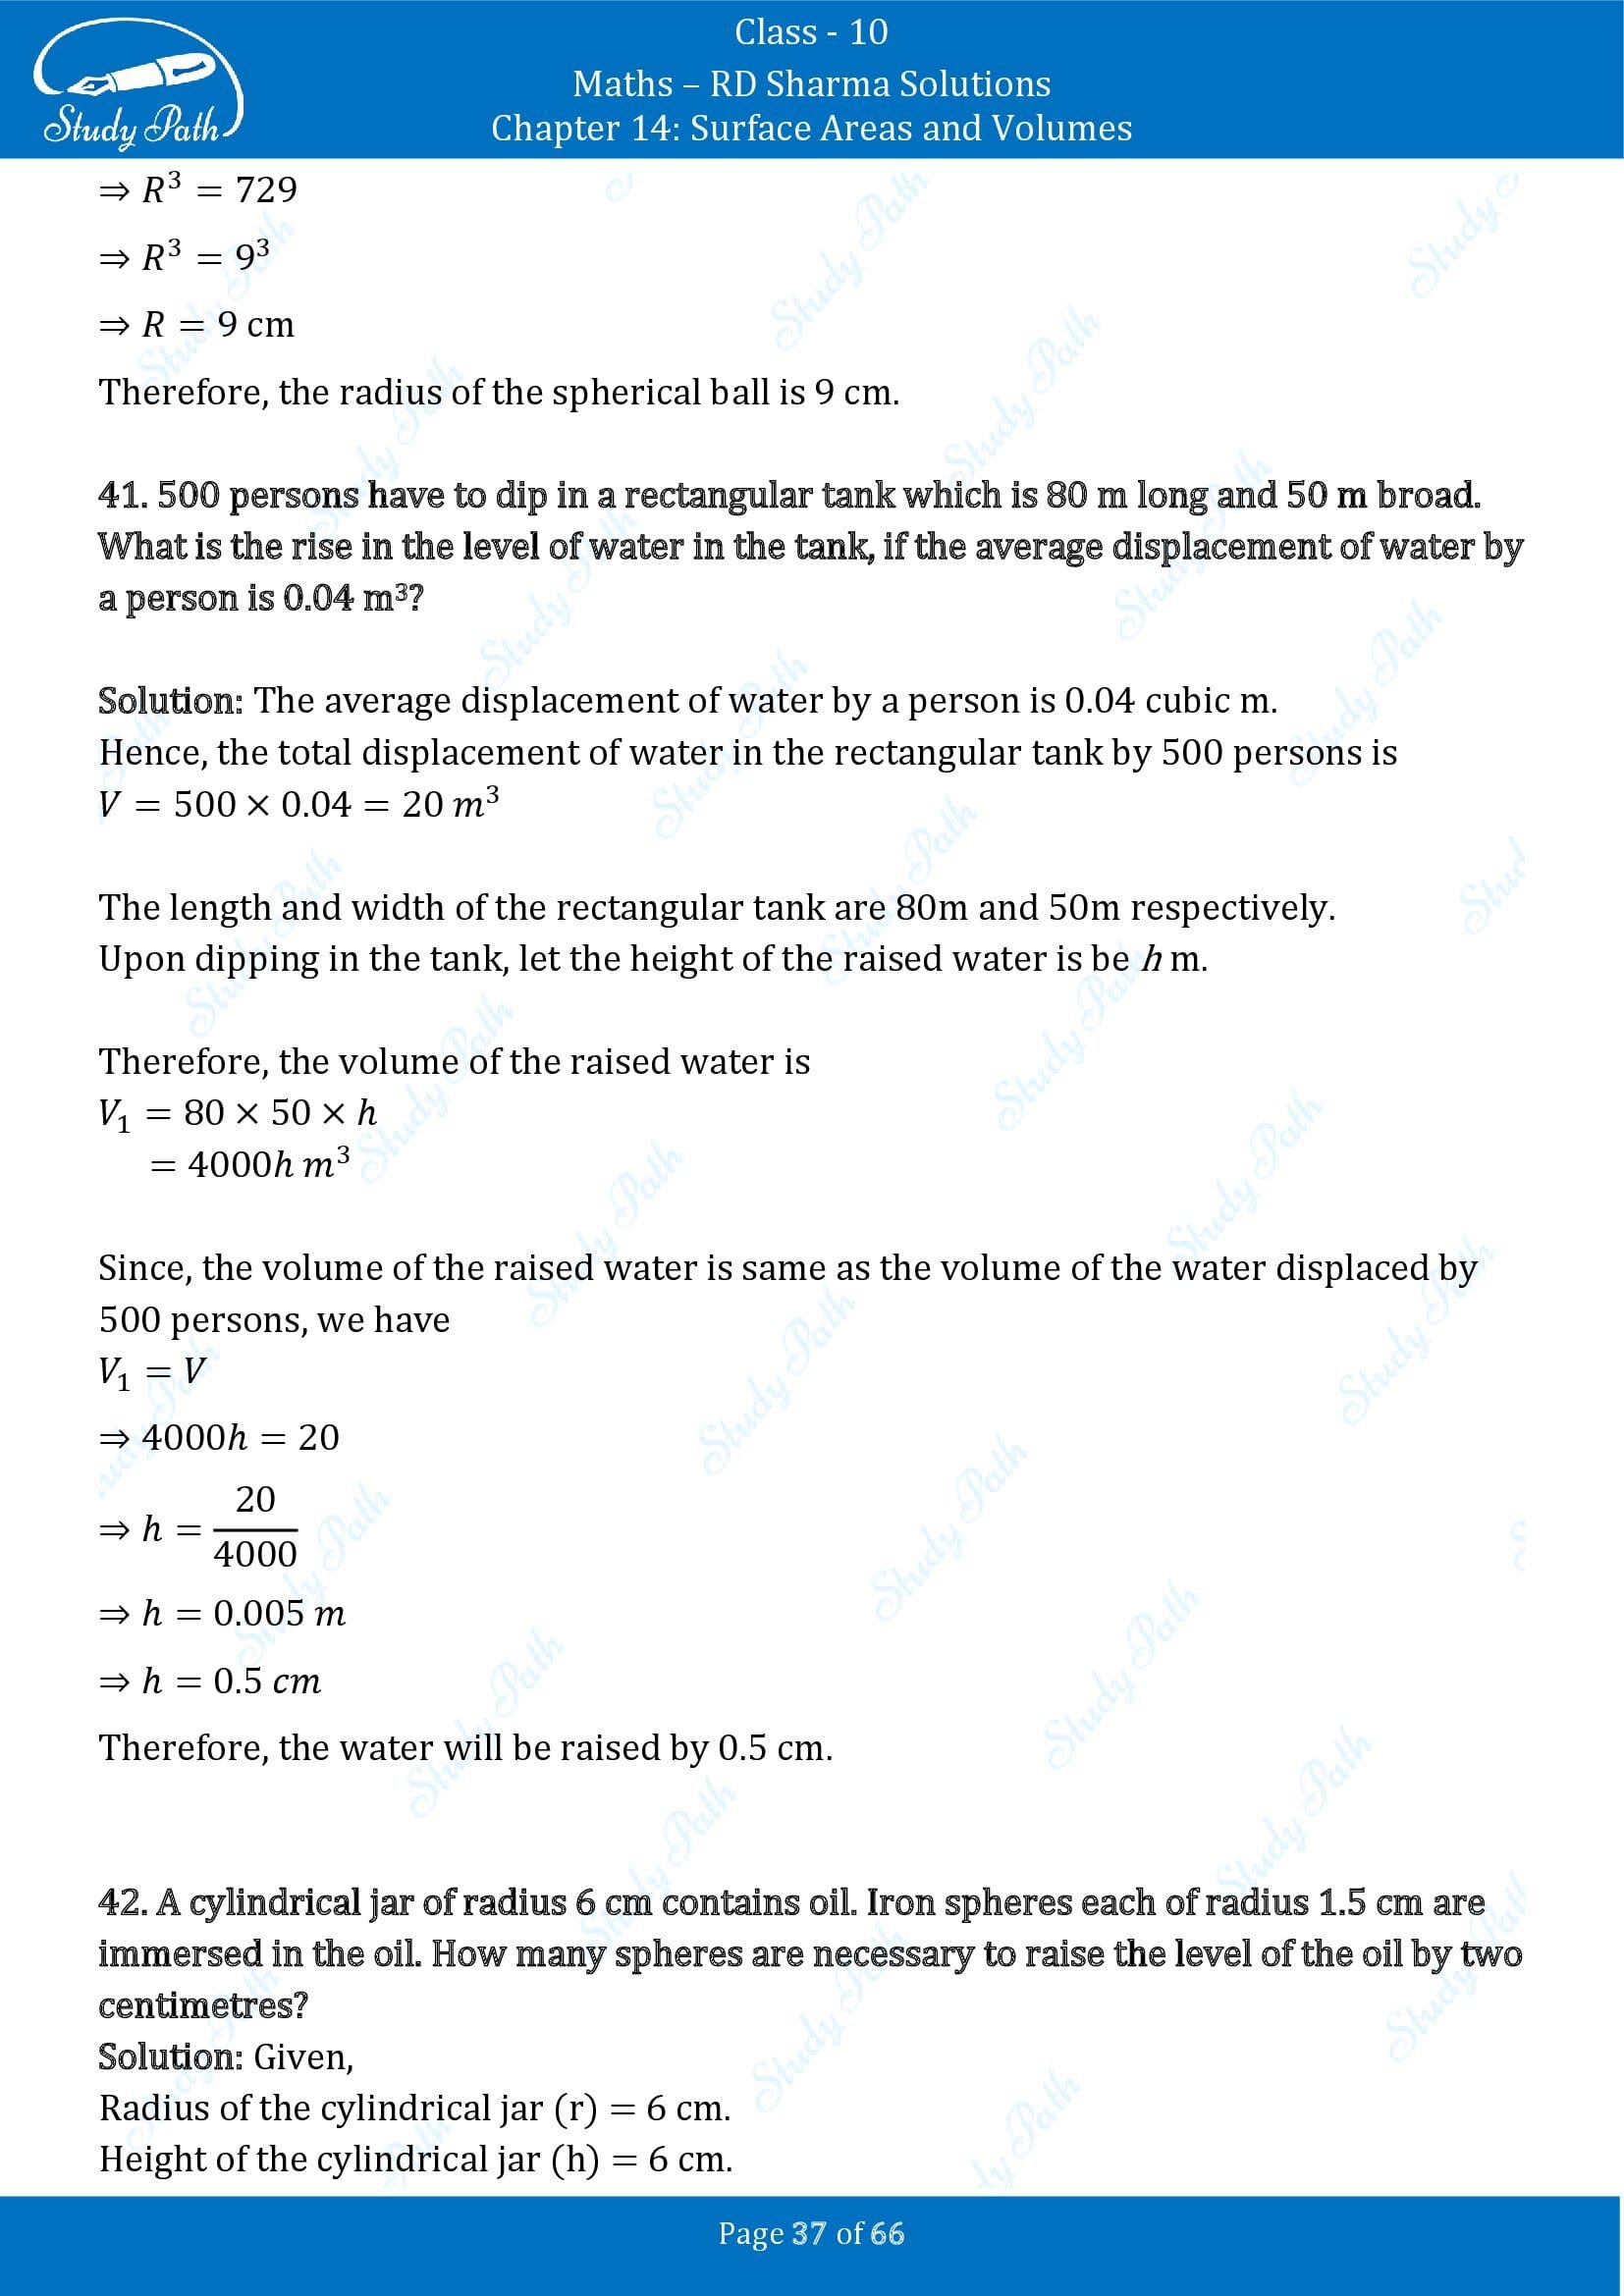 RD Sharma Solutions Class 10 Chapter 14 Surface Areas and Volumes Exercise 14.1 00037